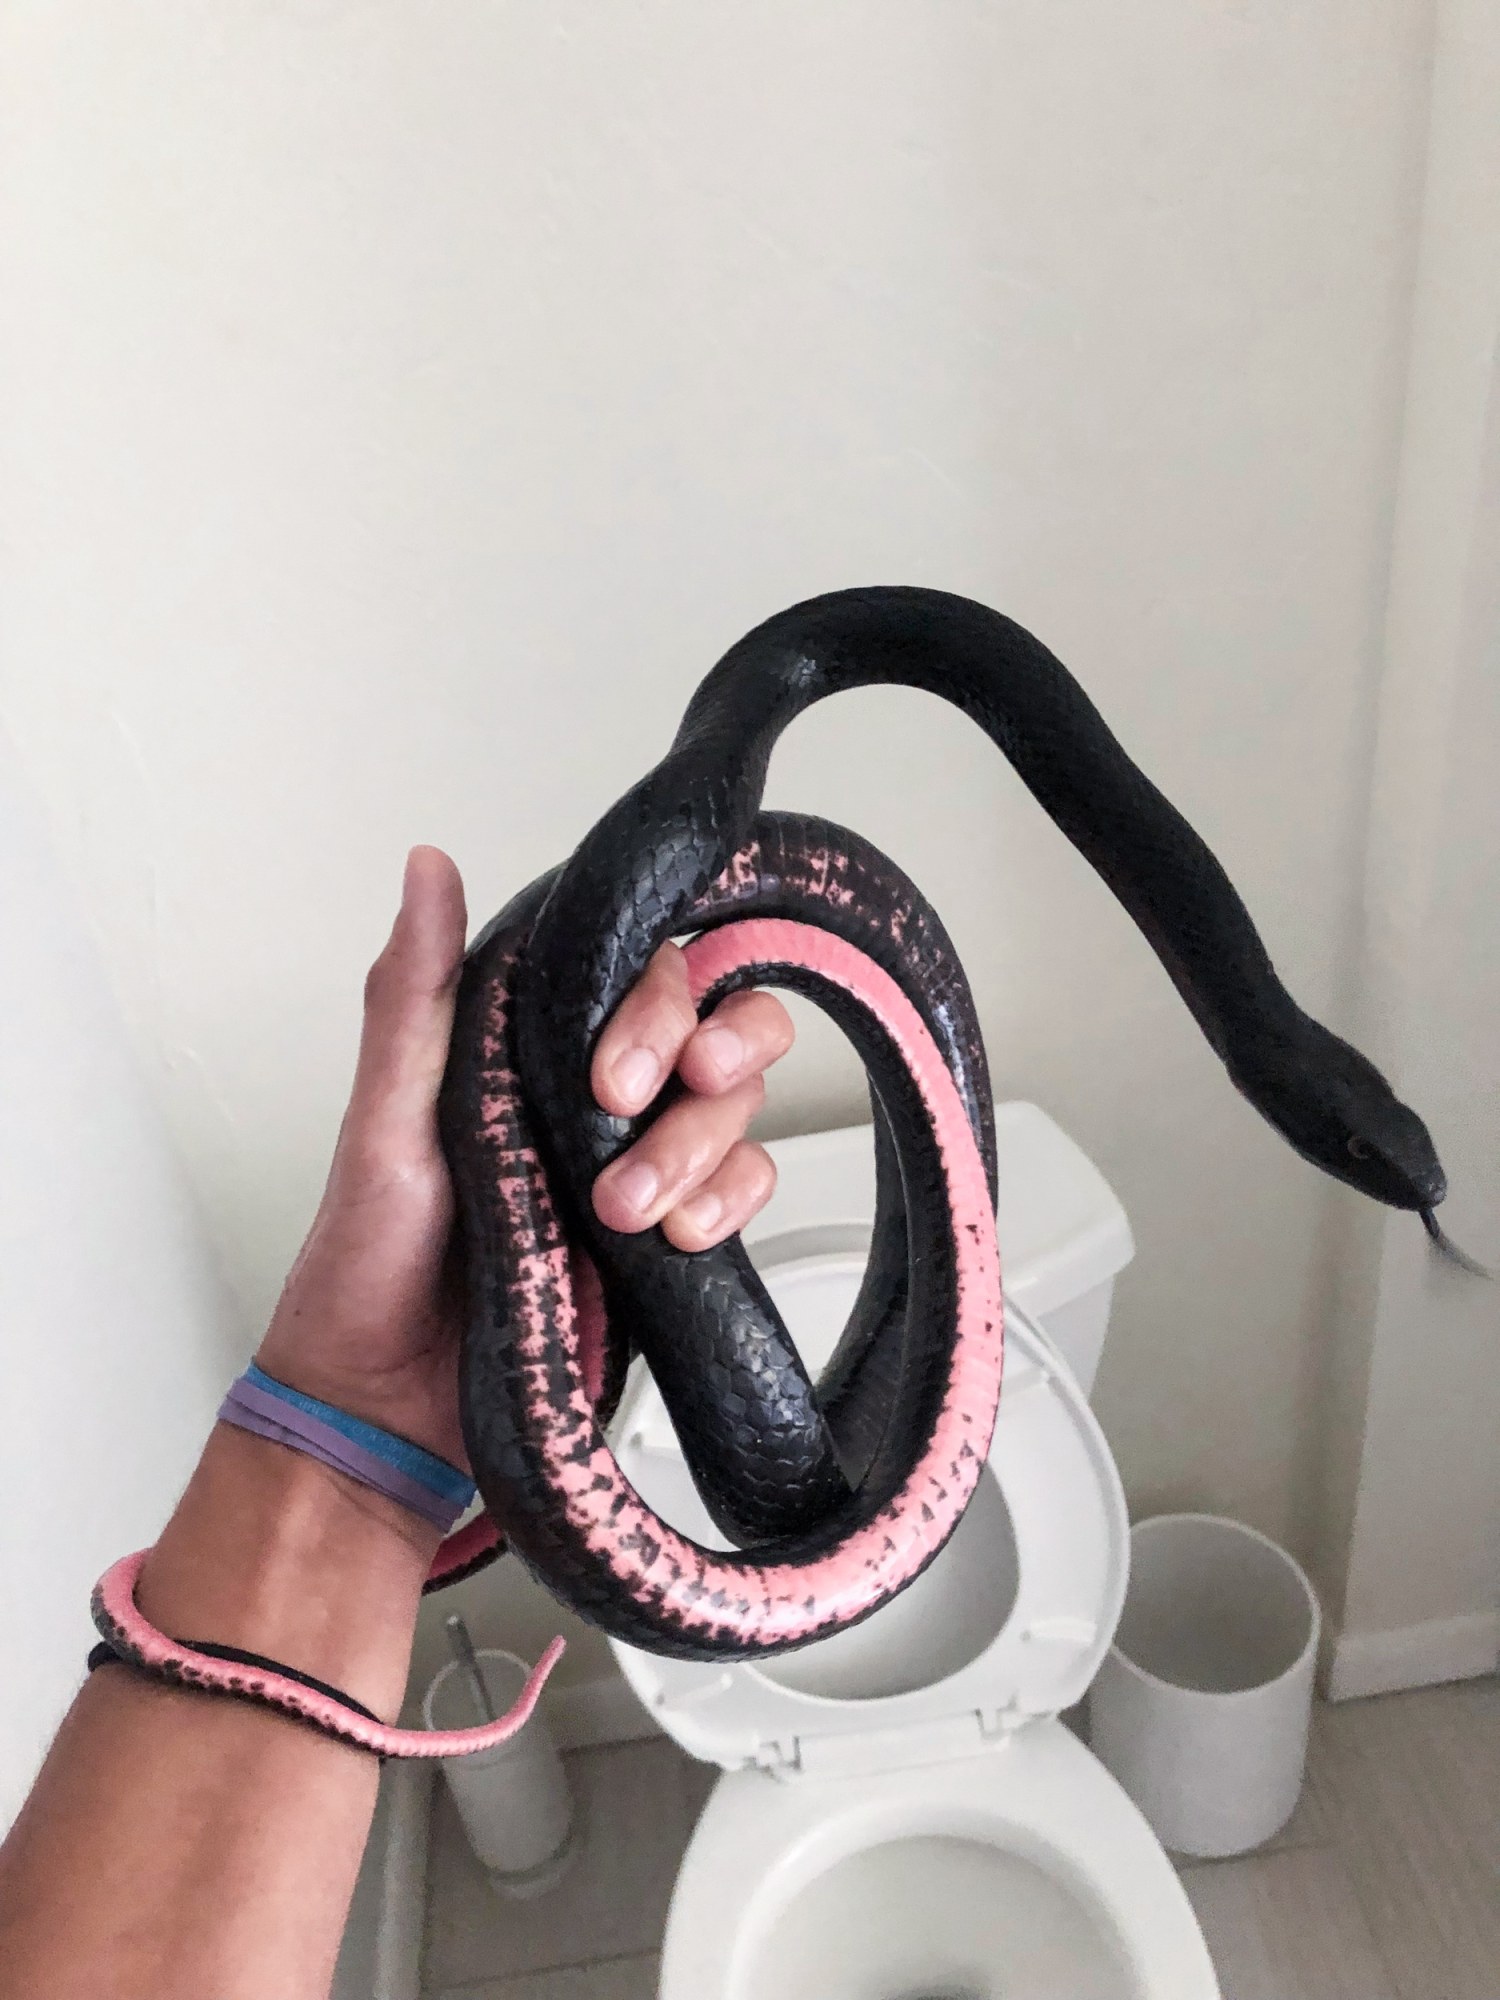 Snake fished out of toilet in Virginia, claimed by owners miles away